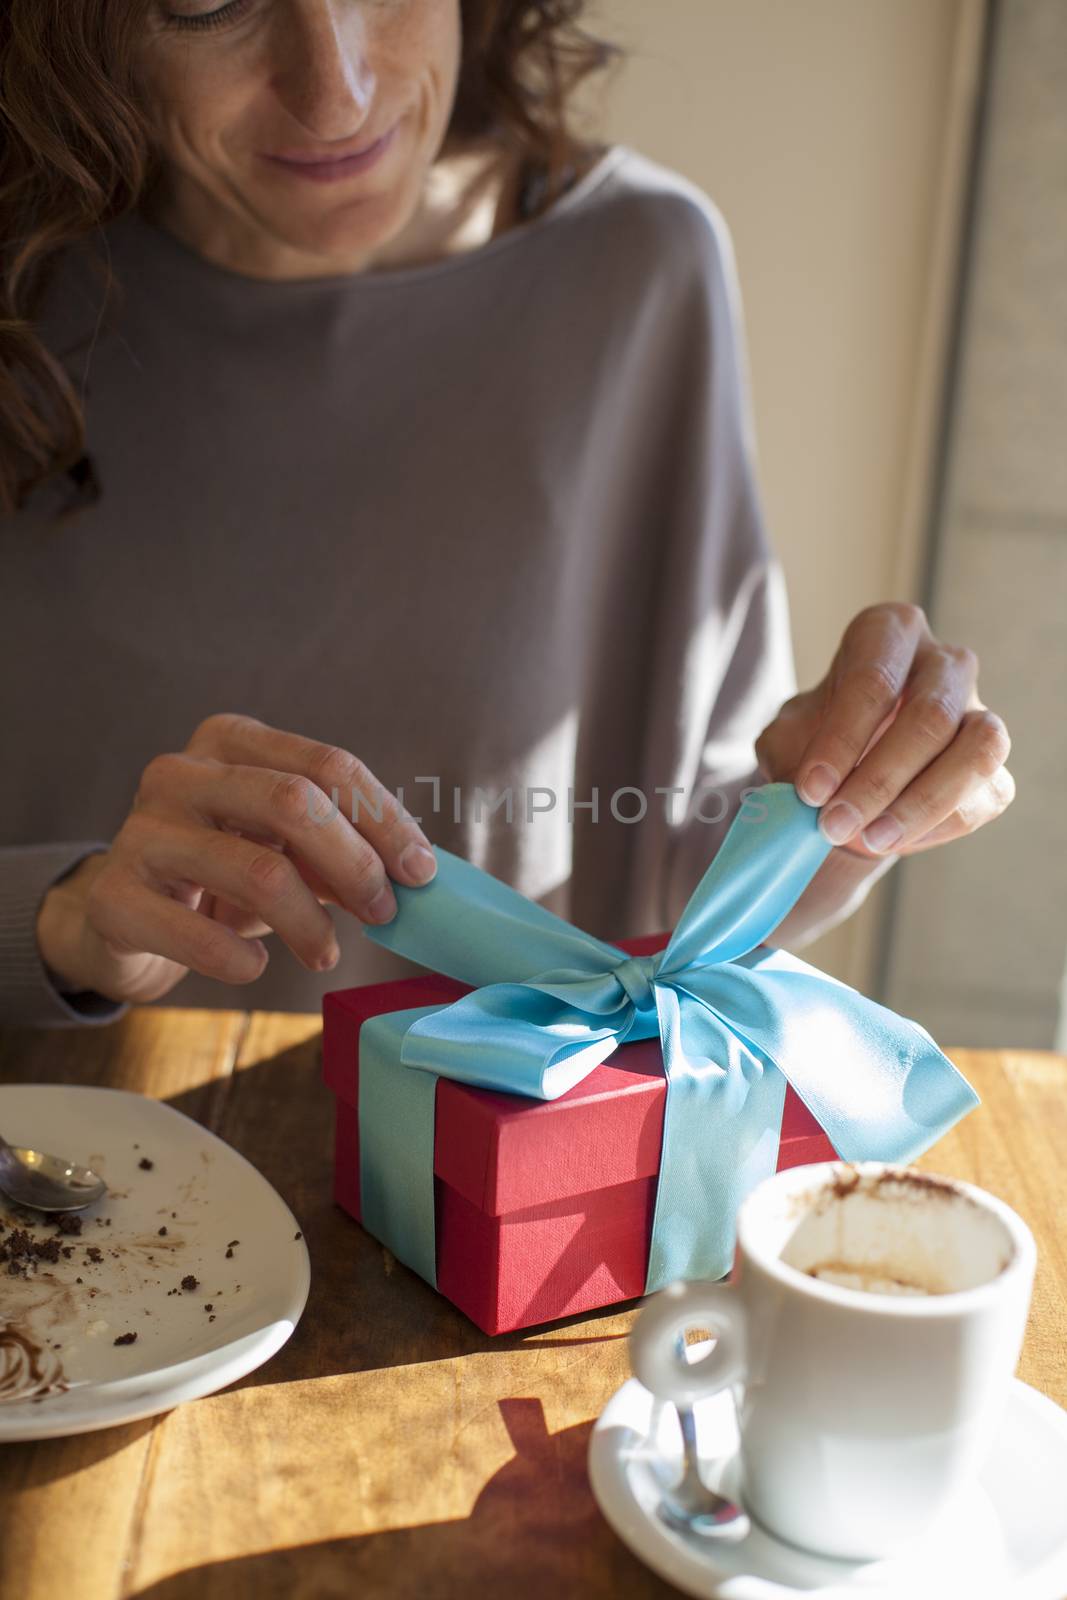 opening gift at breakfast by quintanilla